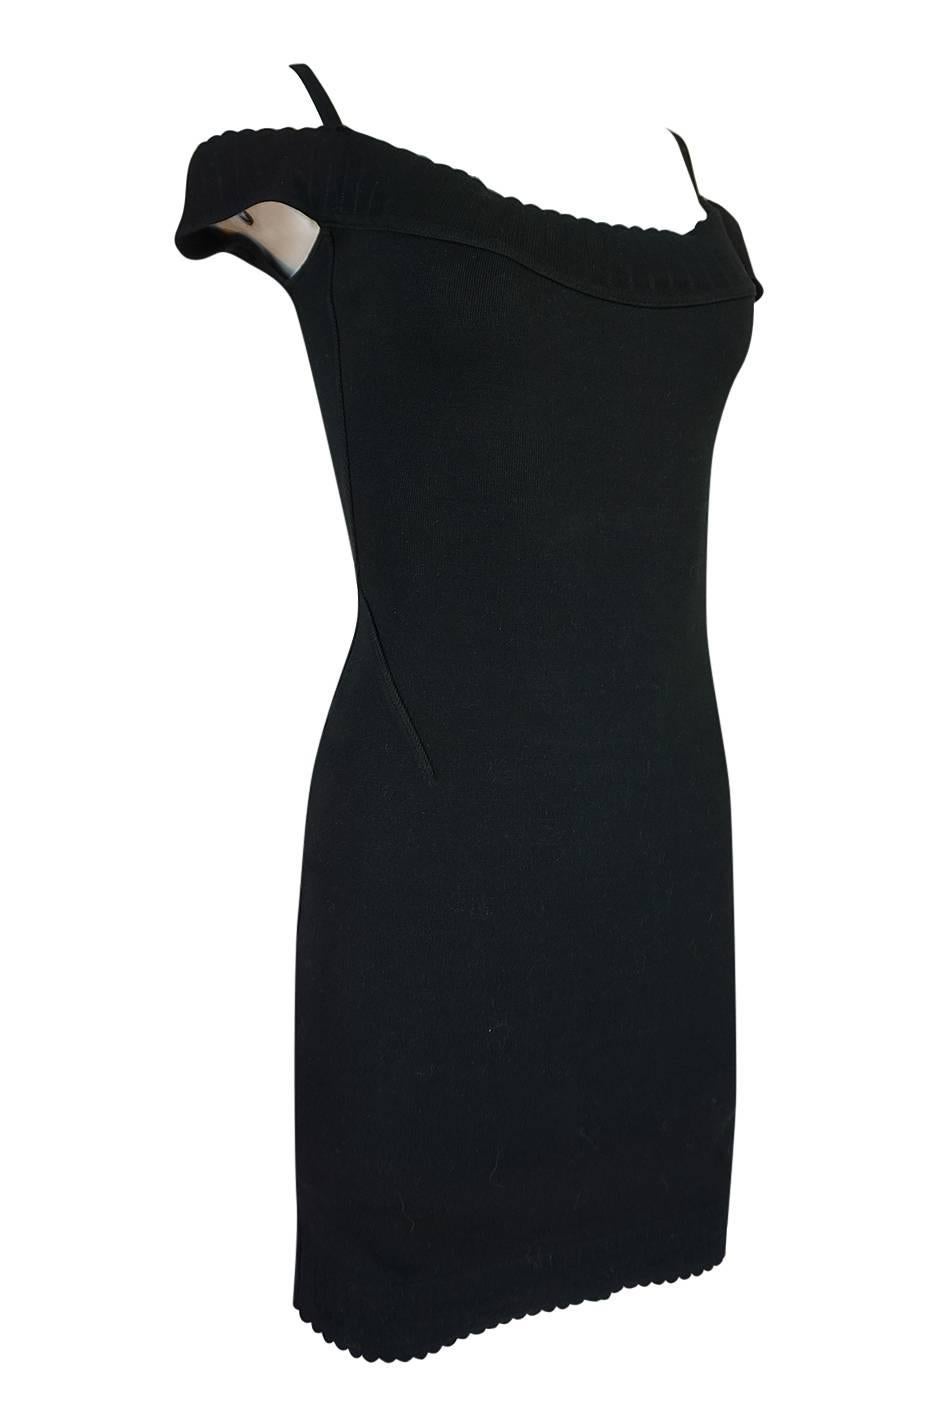 Documented 1992 Azzedine Alaia Off Shoulder Black Knit Dress In Excellent Condition In Rockwood, ON